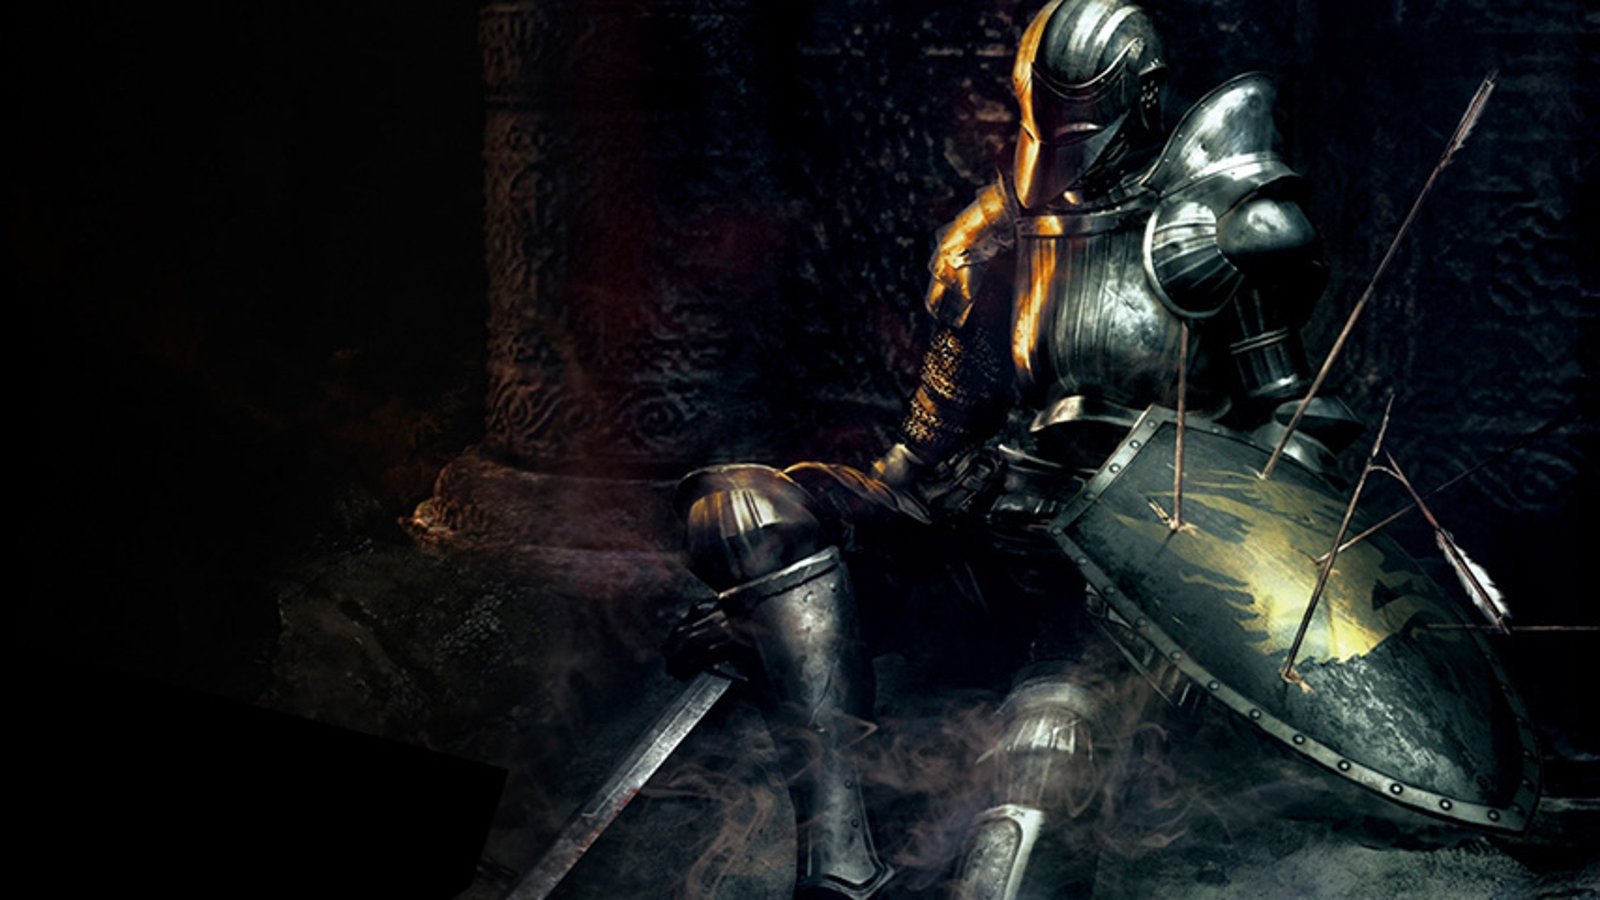 Demon's Souls for PS5 review: A remake leads the way into the next